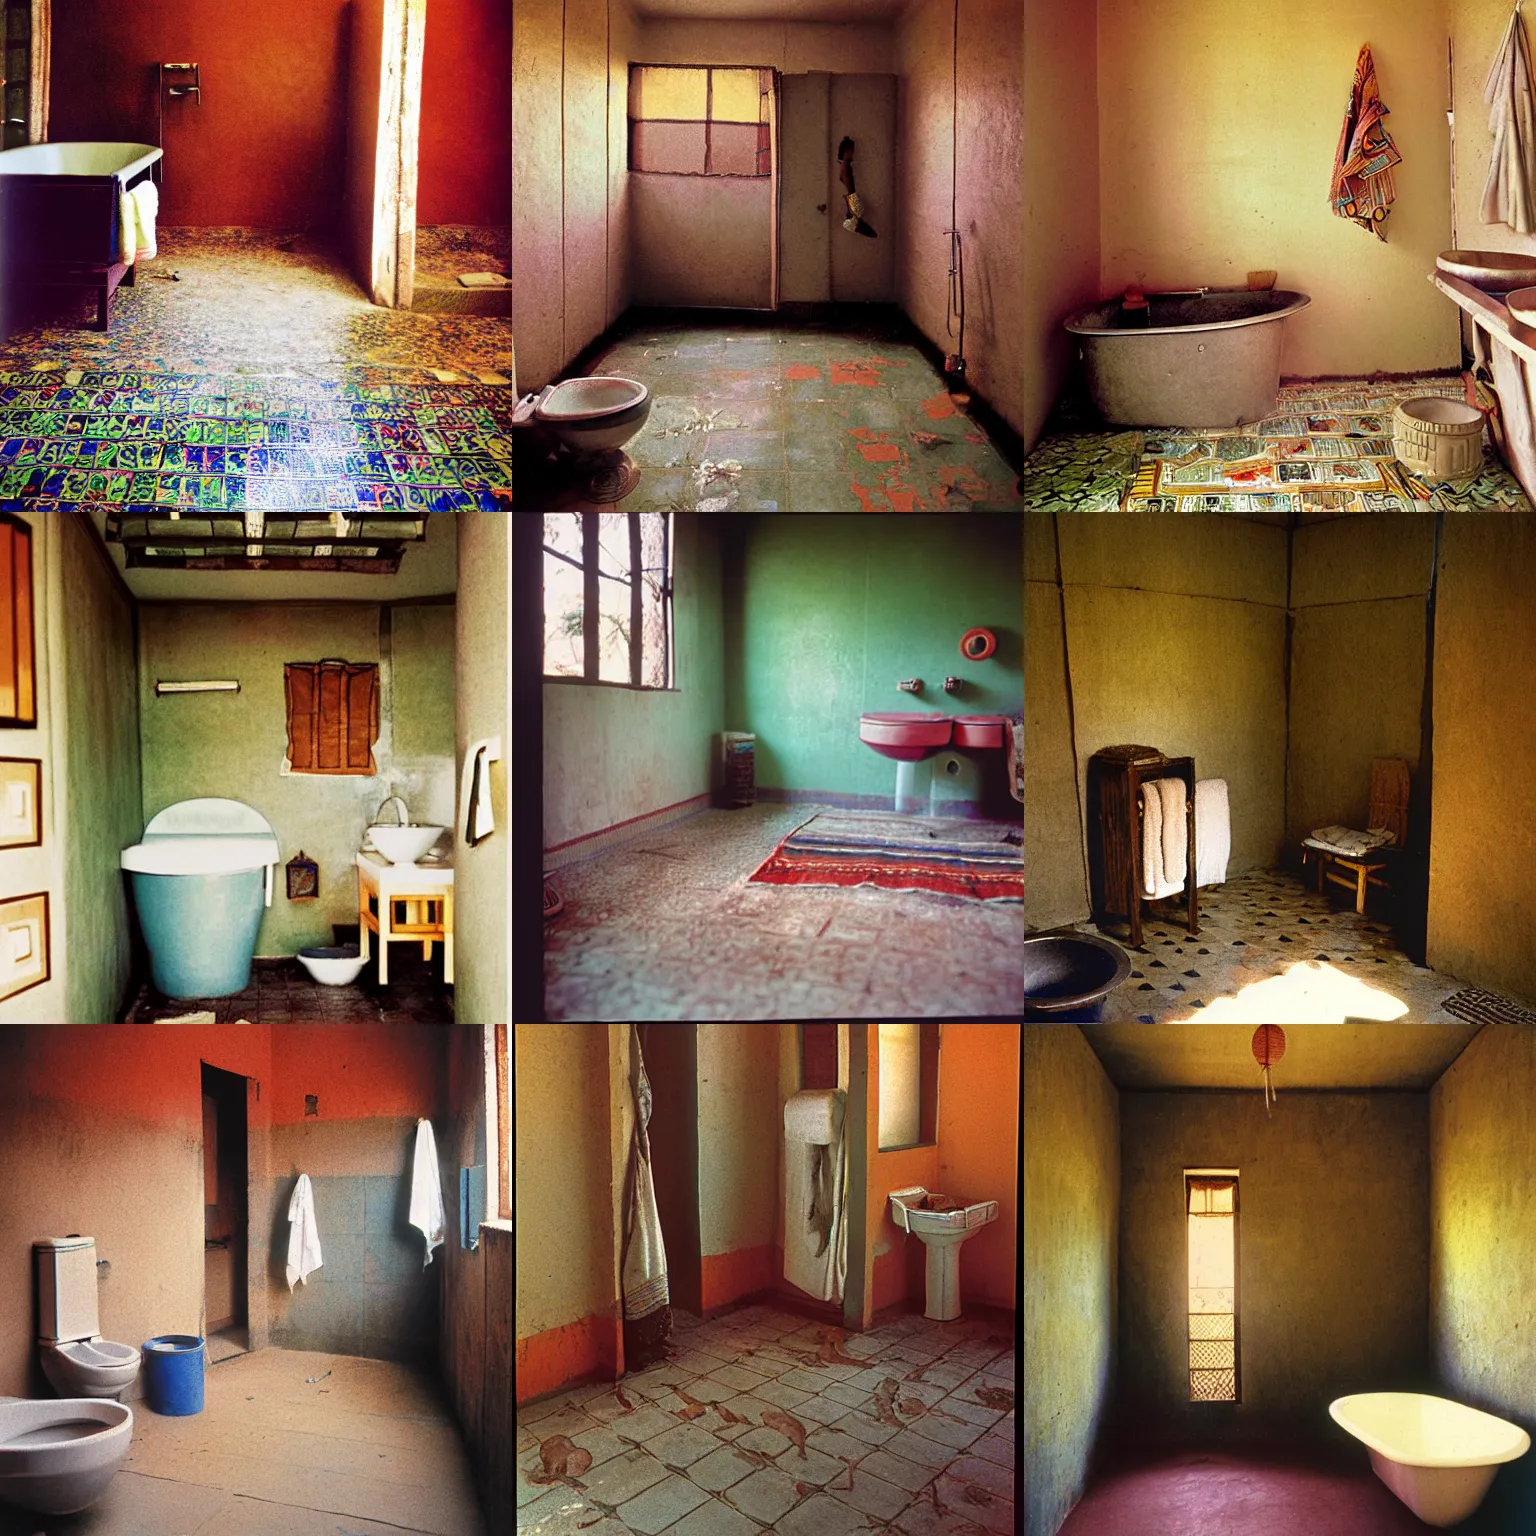 Prompt: a long - shot, color home photograph portrait of a africa bathroom, floor, ceiling, day lighting, 1 9 9 0 photo from photograph magazine.